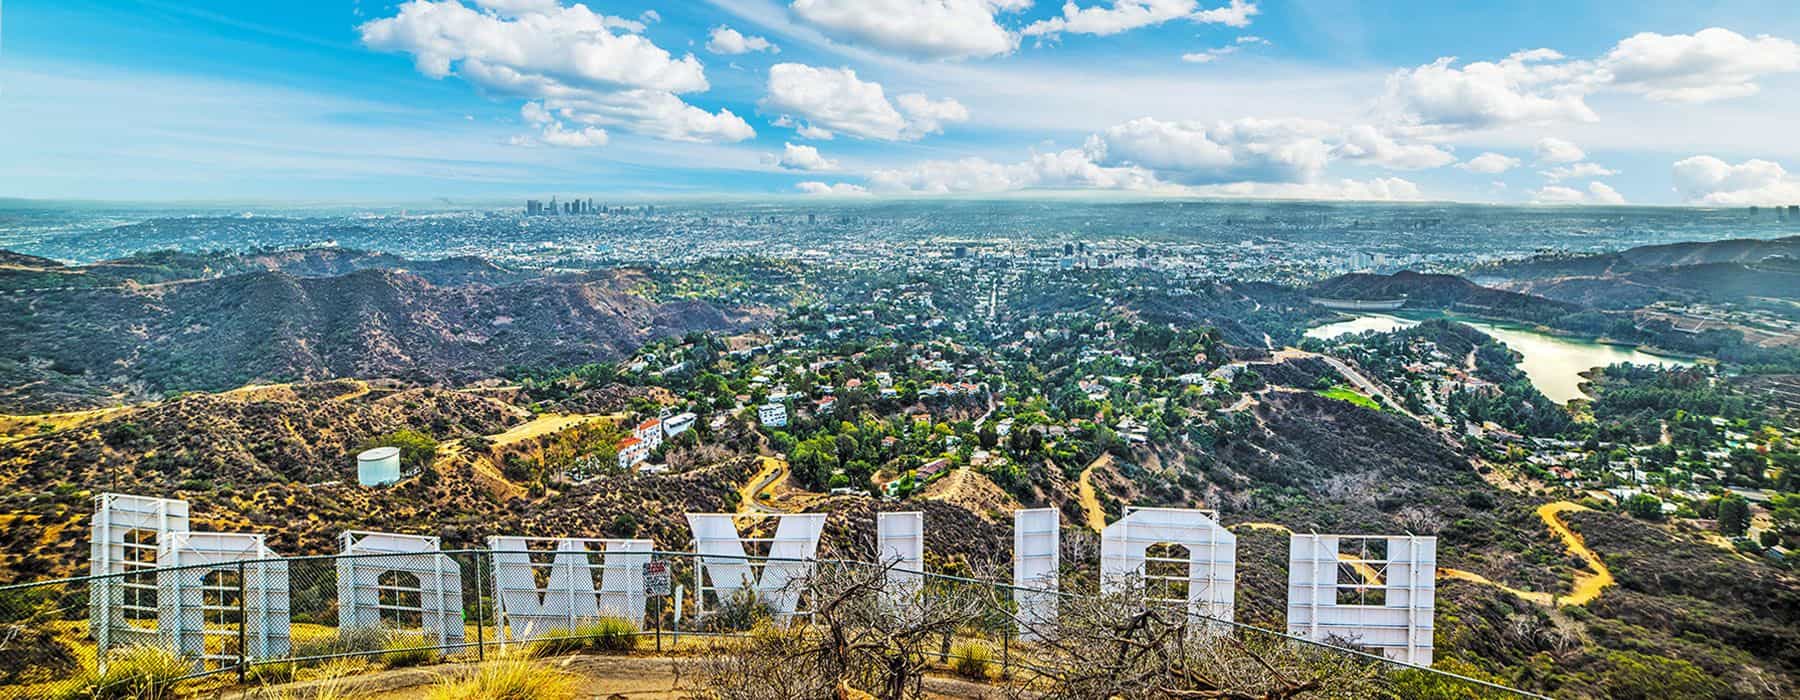 Hollywood_view